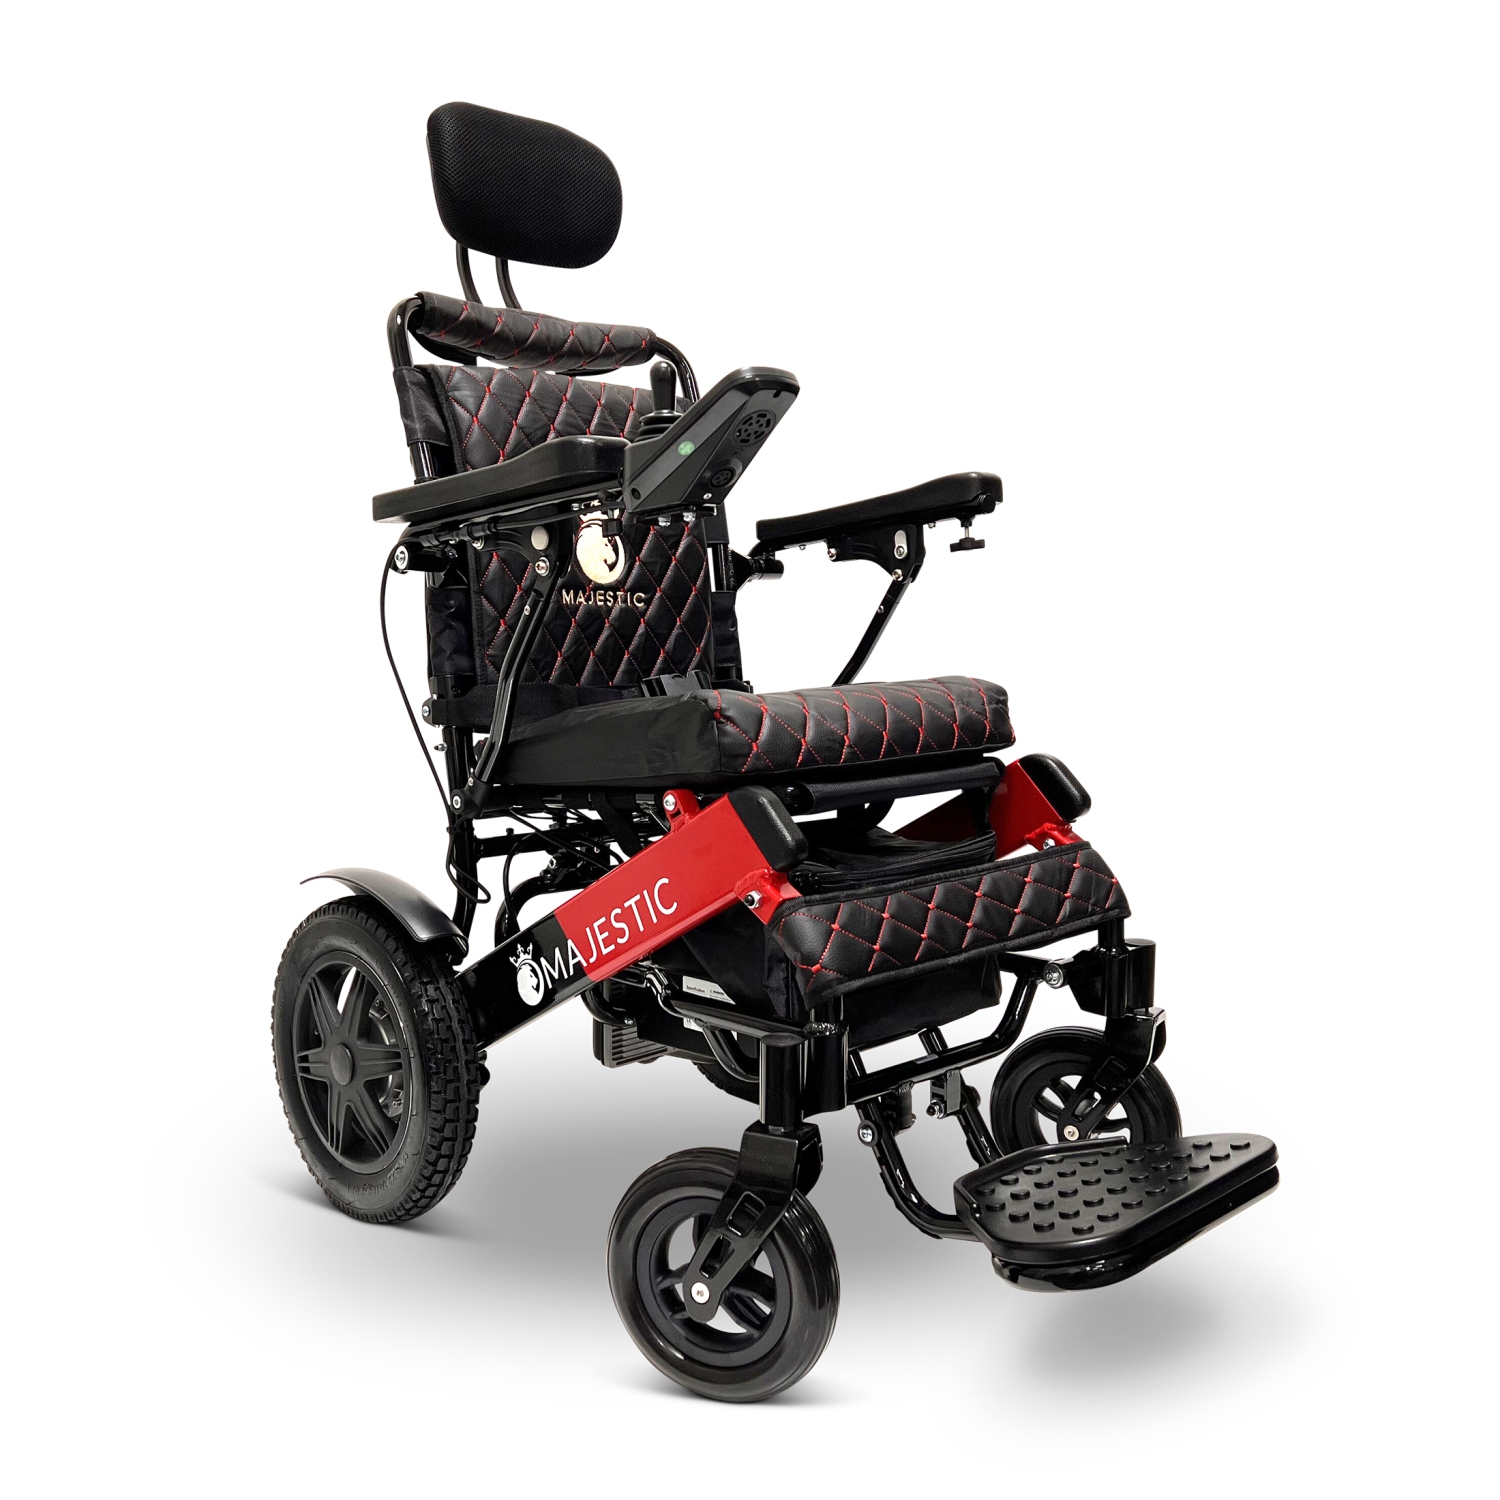 MAJESTIC IQ-9000 Airline Approved Luxury Electric Wheelchair | Auto Recline, LCD Joystick, Foldable, Up to 30 KM Range, Ultra-Light | 17’’ Seat Width, Red Frame, Black Textile